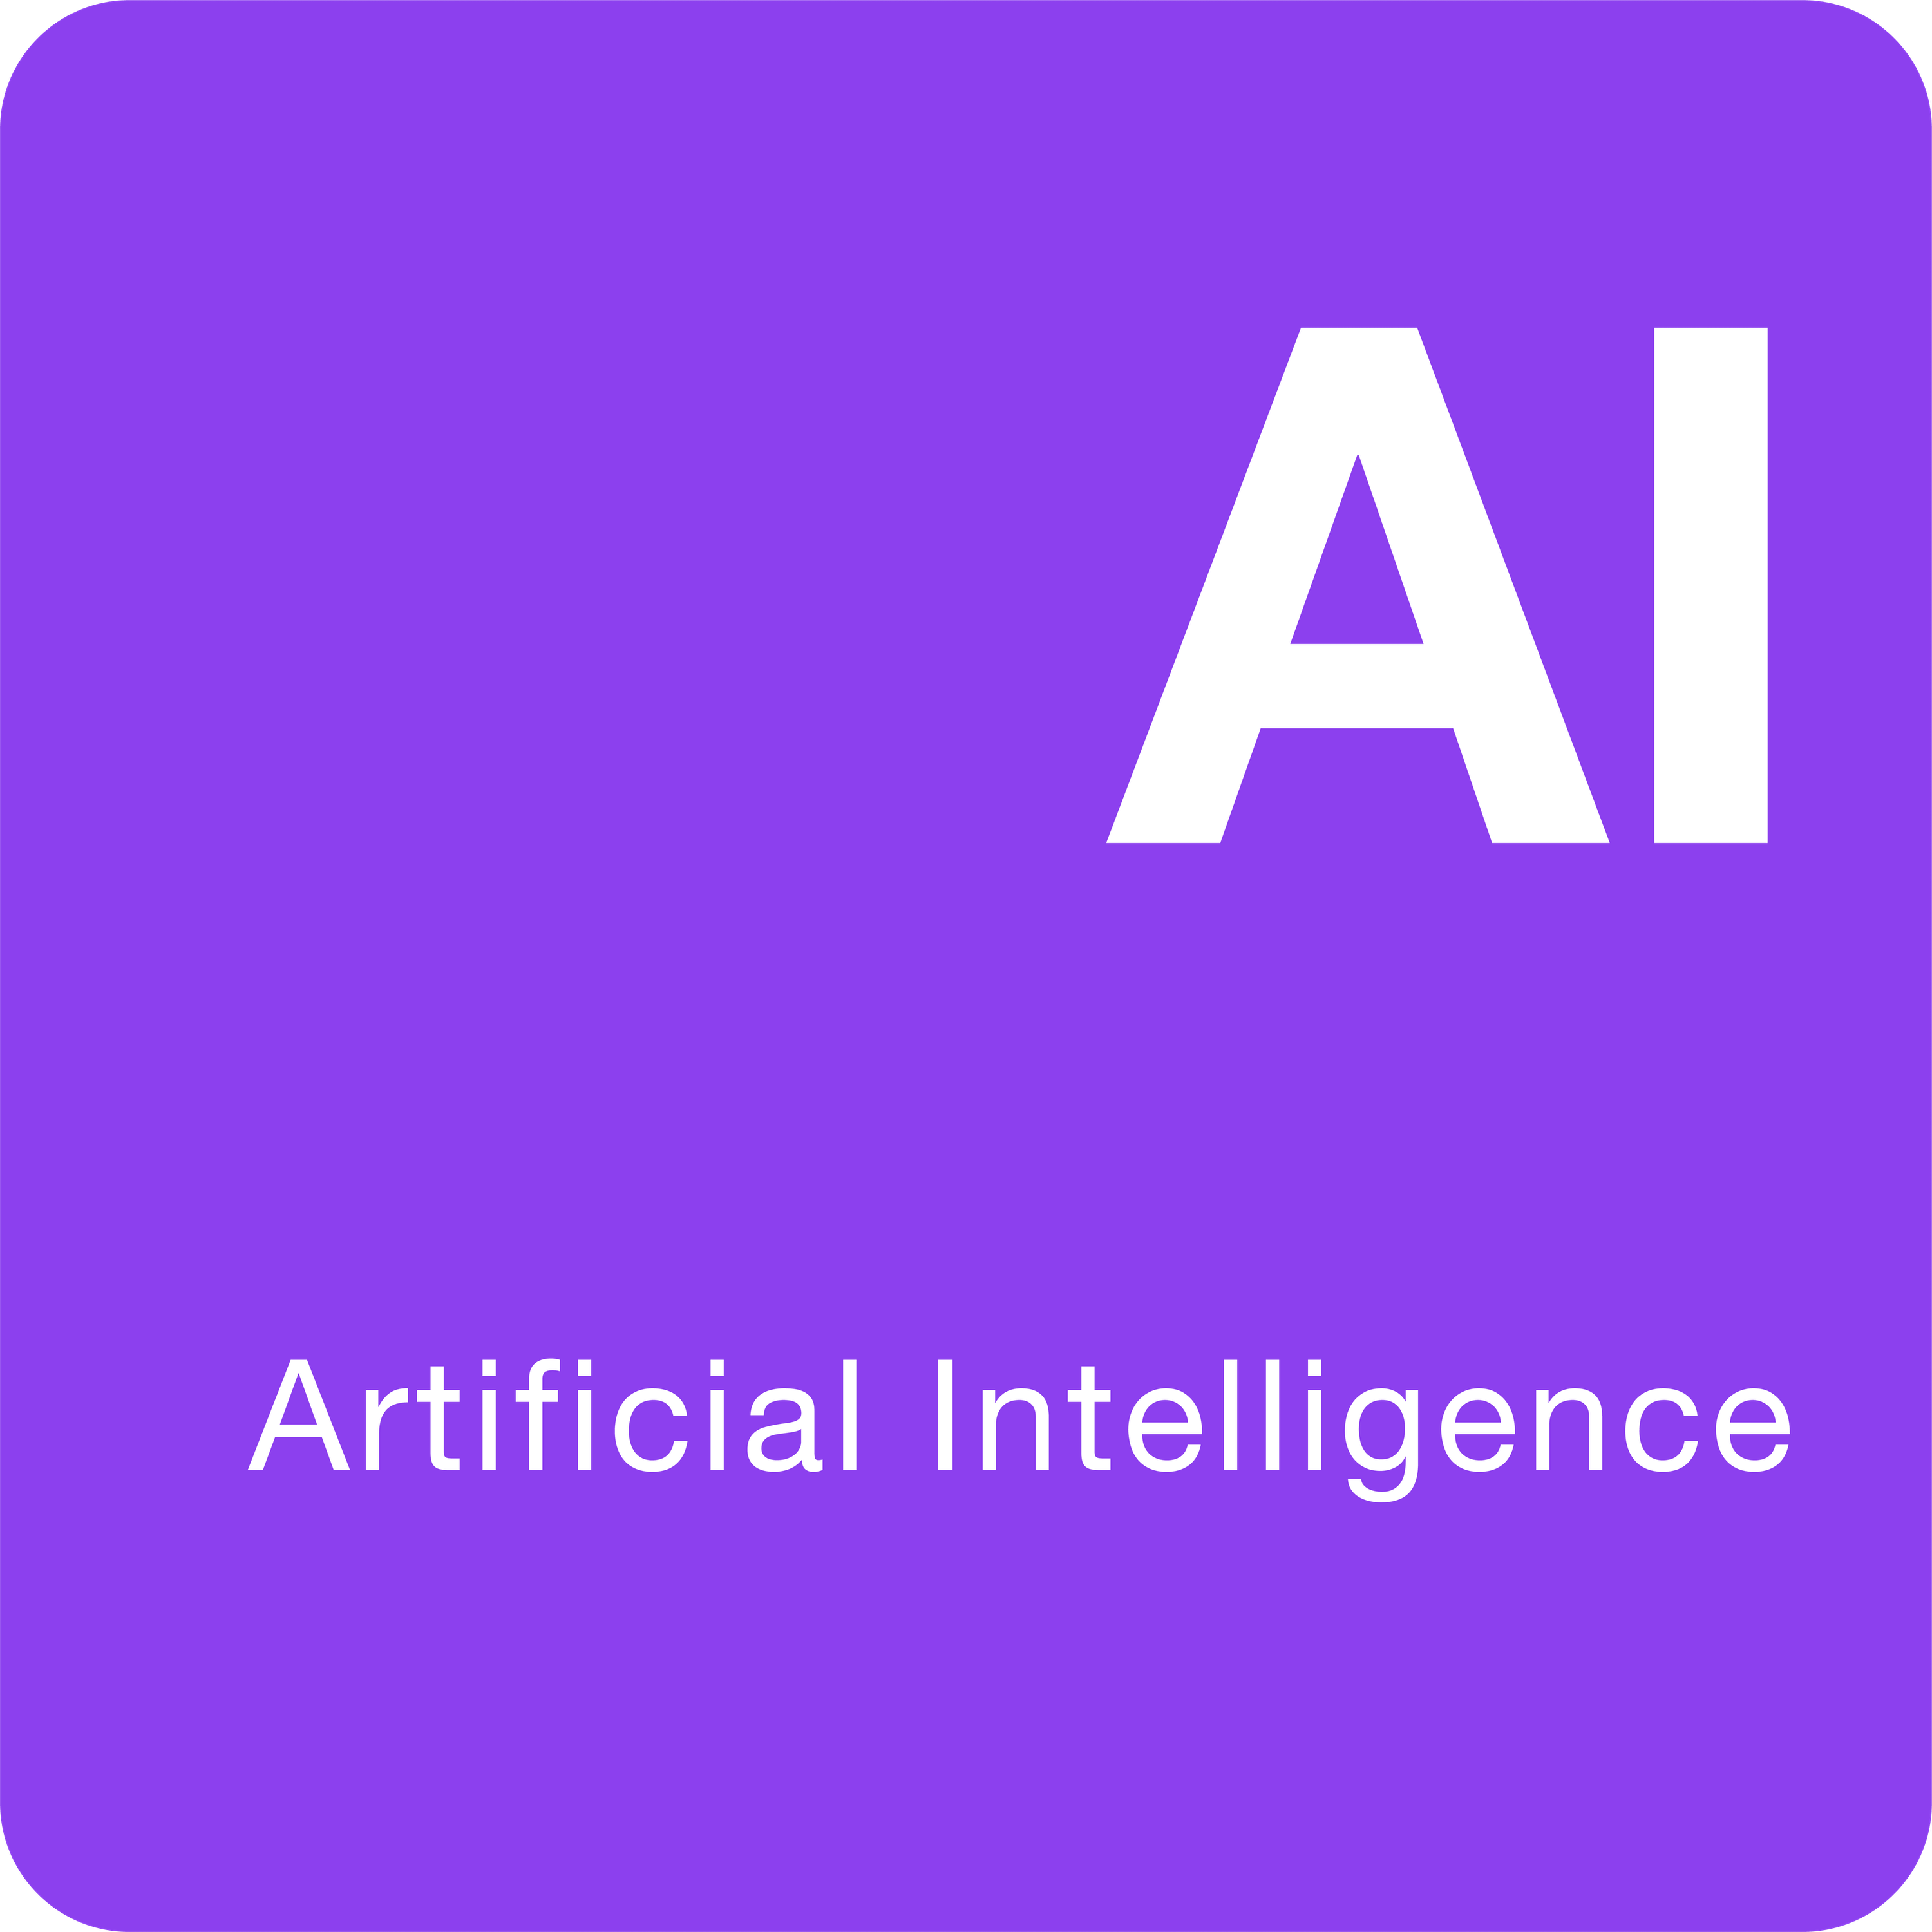 Artificial Intelligence